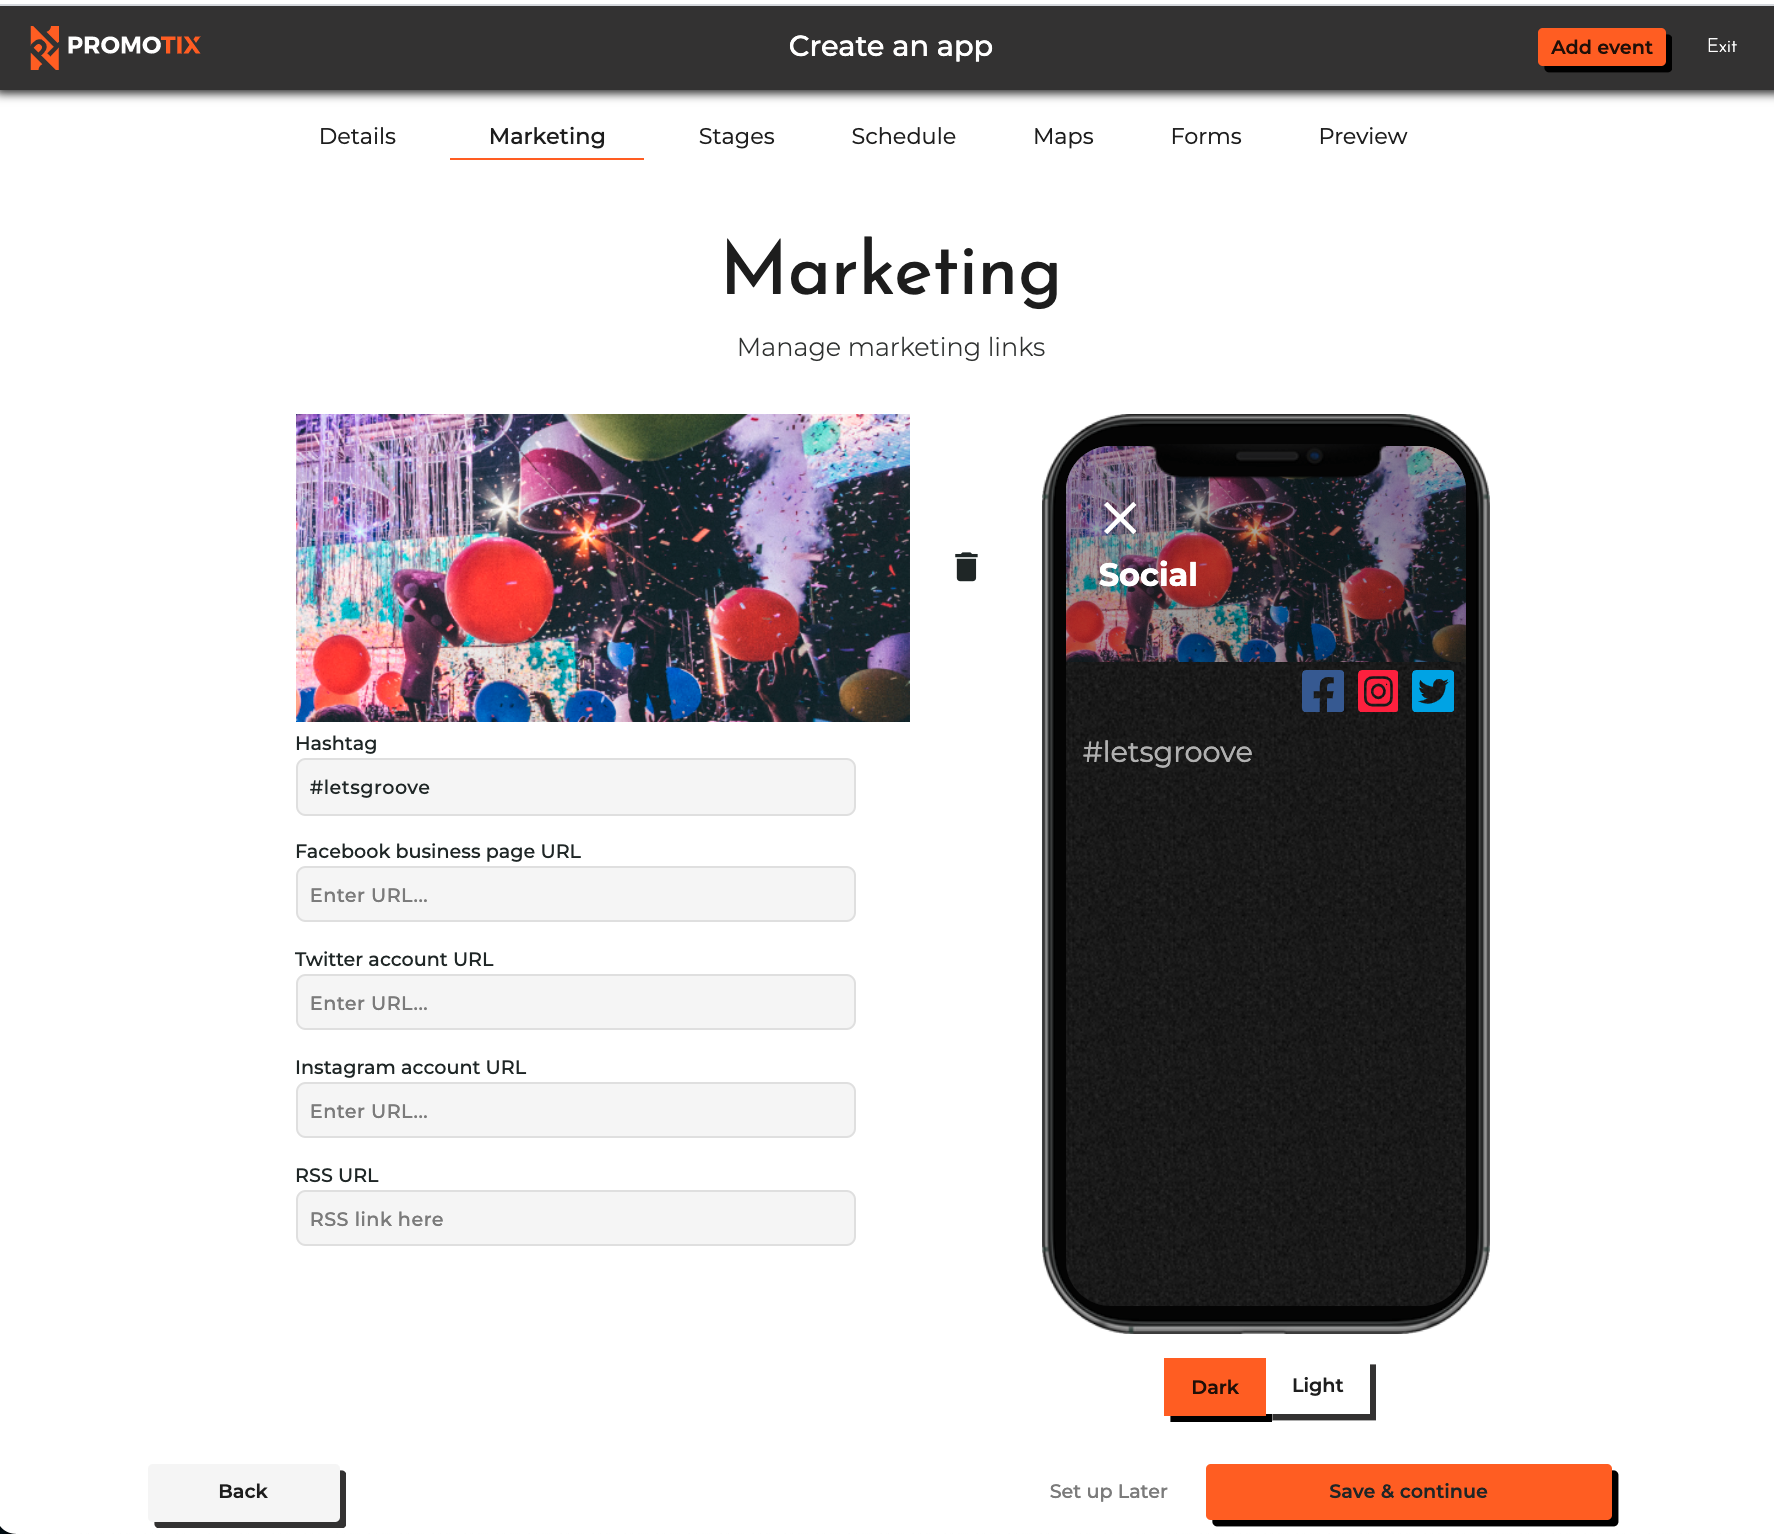 Create custom branded event mobile apps without coding knowledge or developers and launch them in the app stores